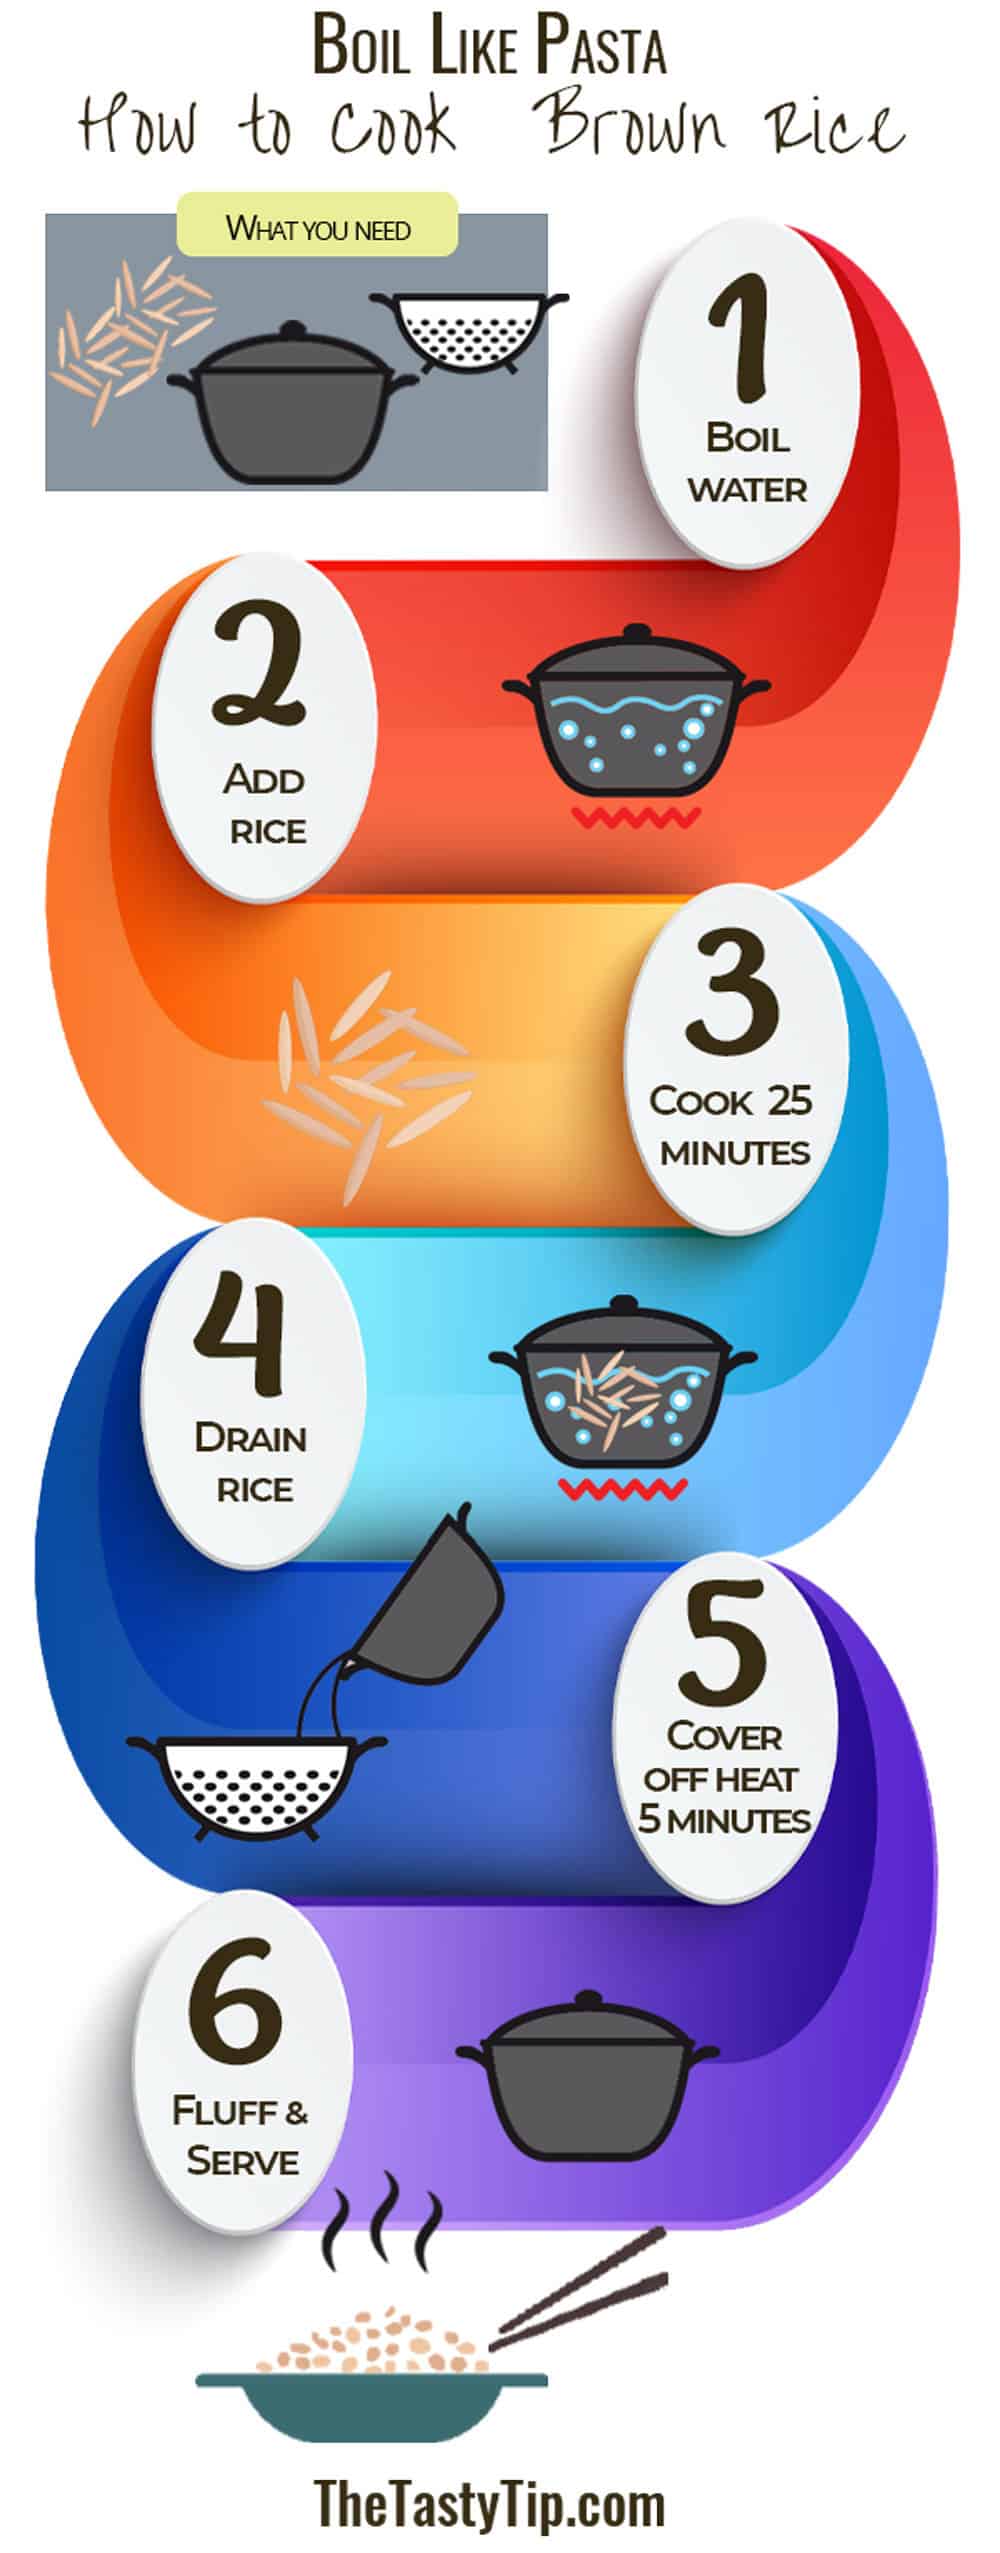 infographic showing how to cook brown rice on the stove with the pasta method